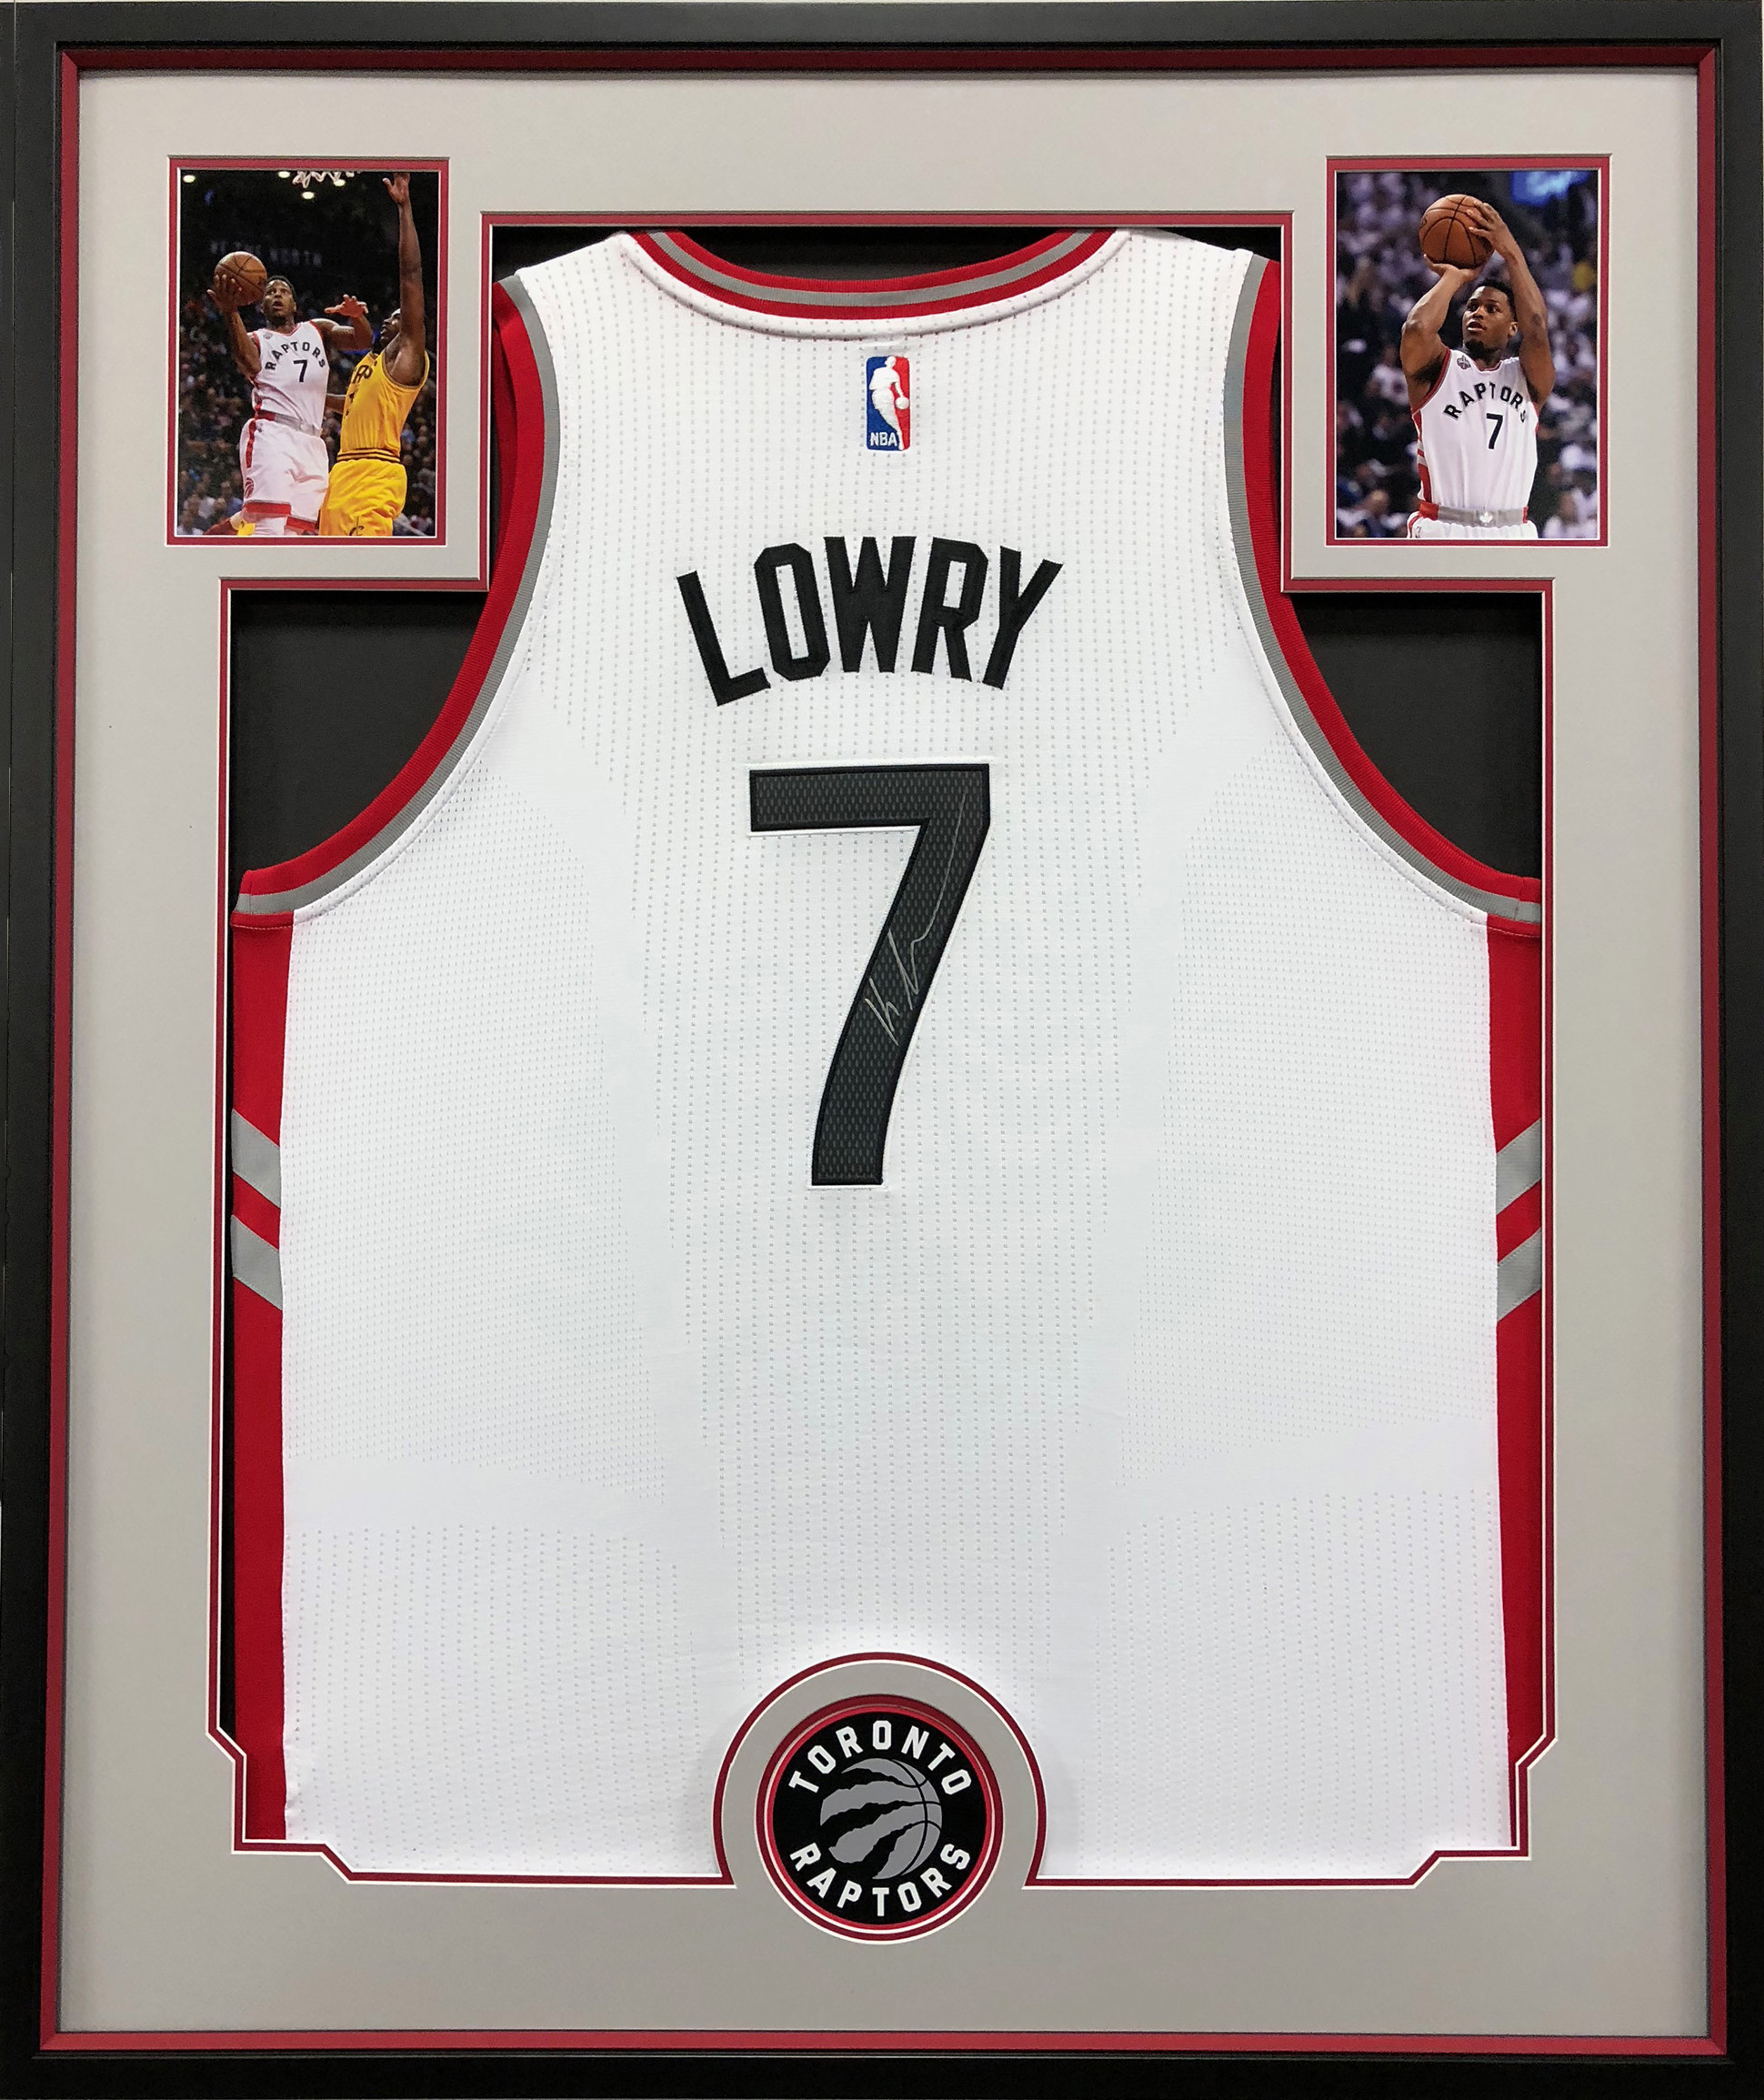 Kyle Lowry Jersey, Signed – 30×36 